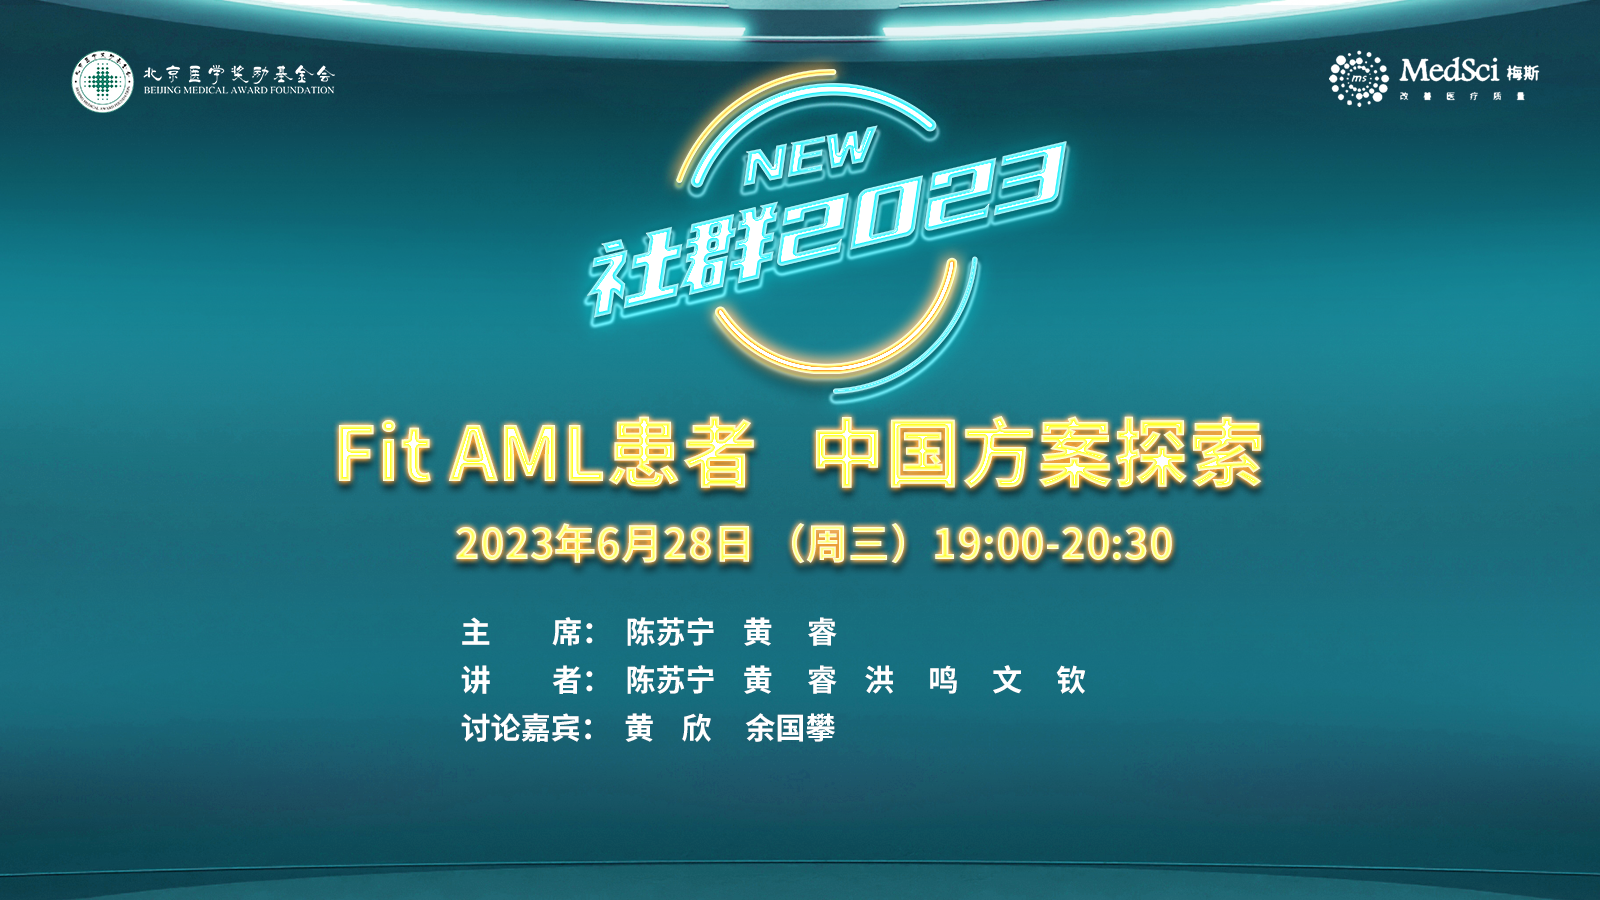 Fit AML<font color="red">患者</font><font color="red">中国</font>方案探索